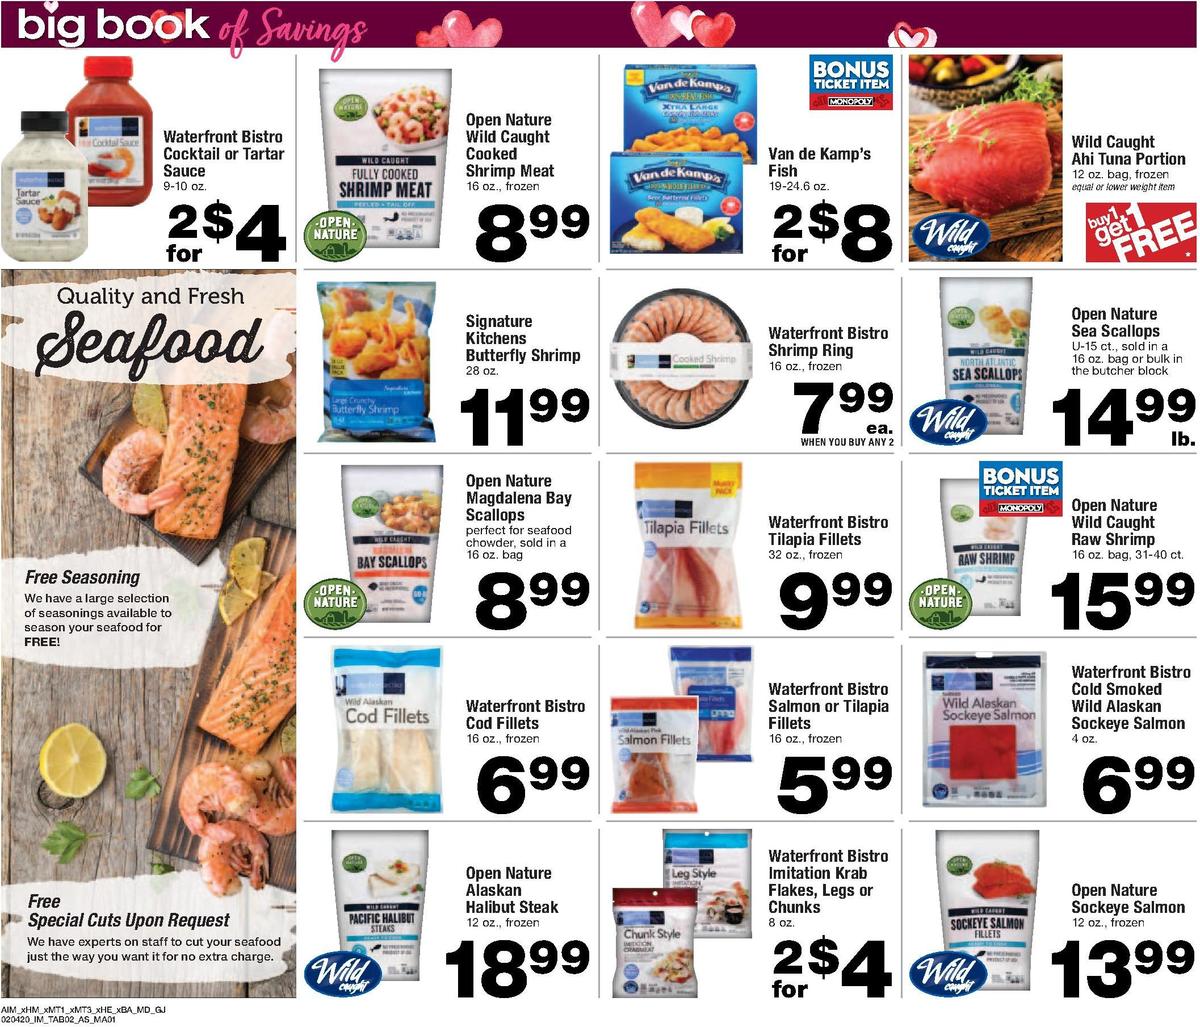 Albertsons Magazine Weekly Ad from February 4